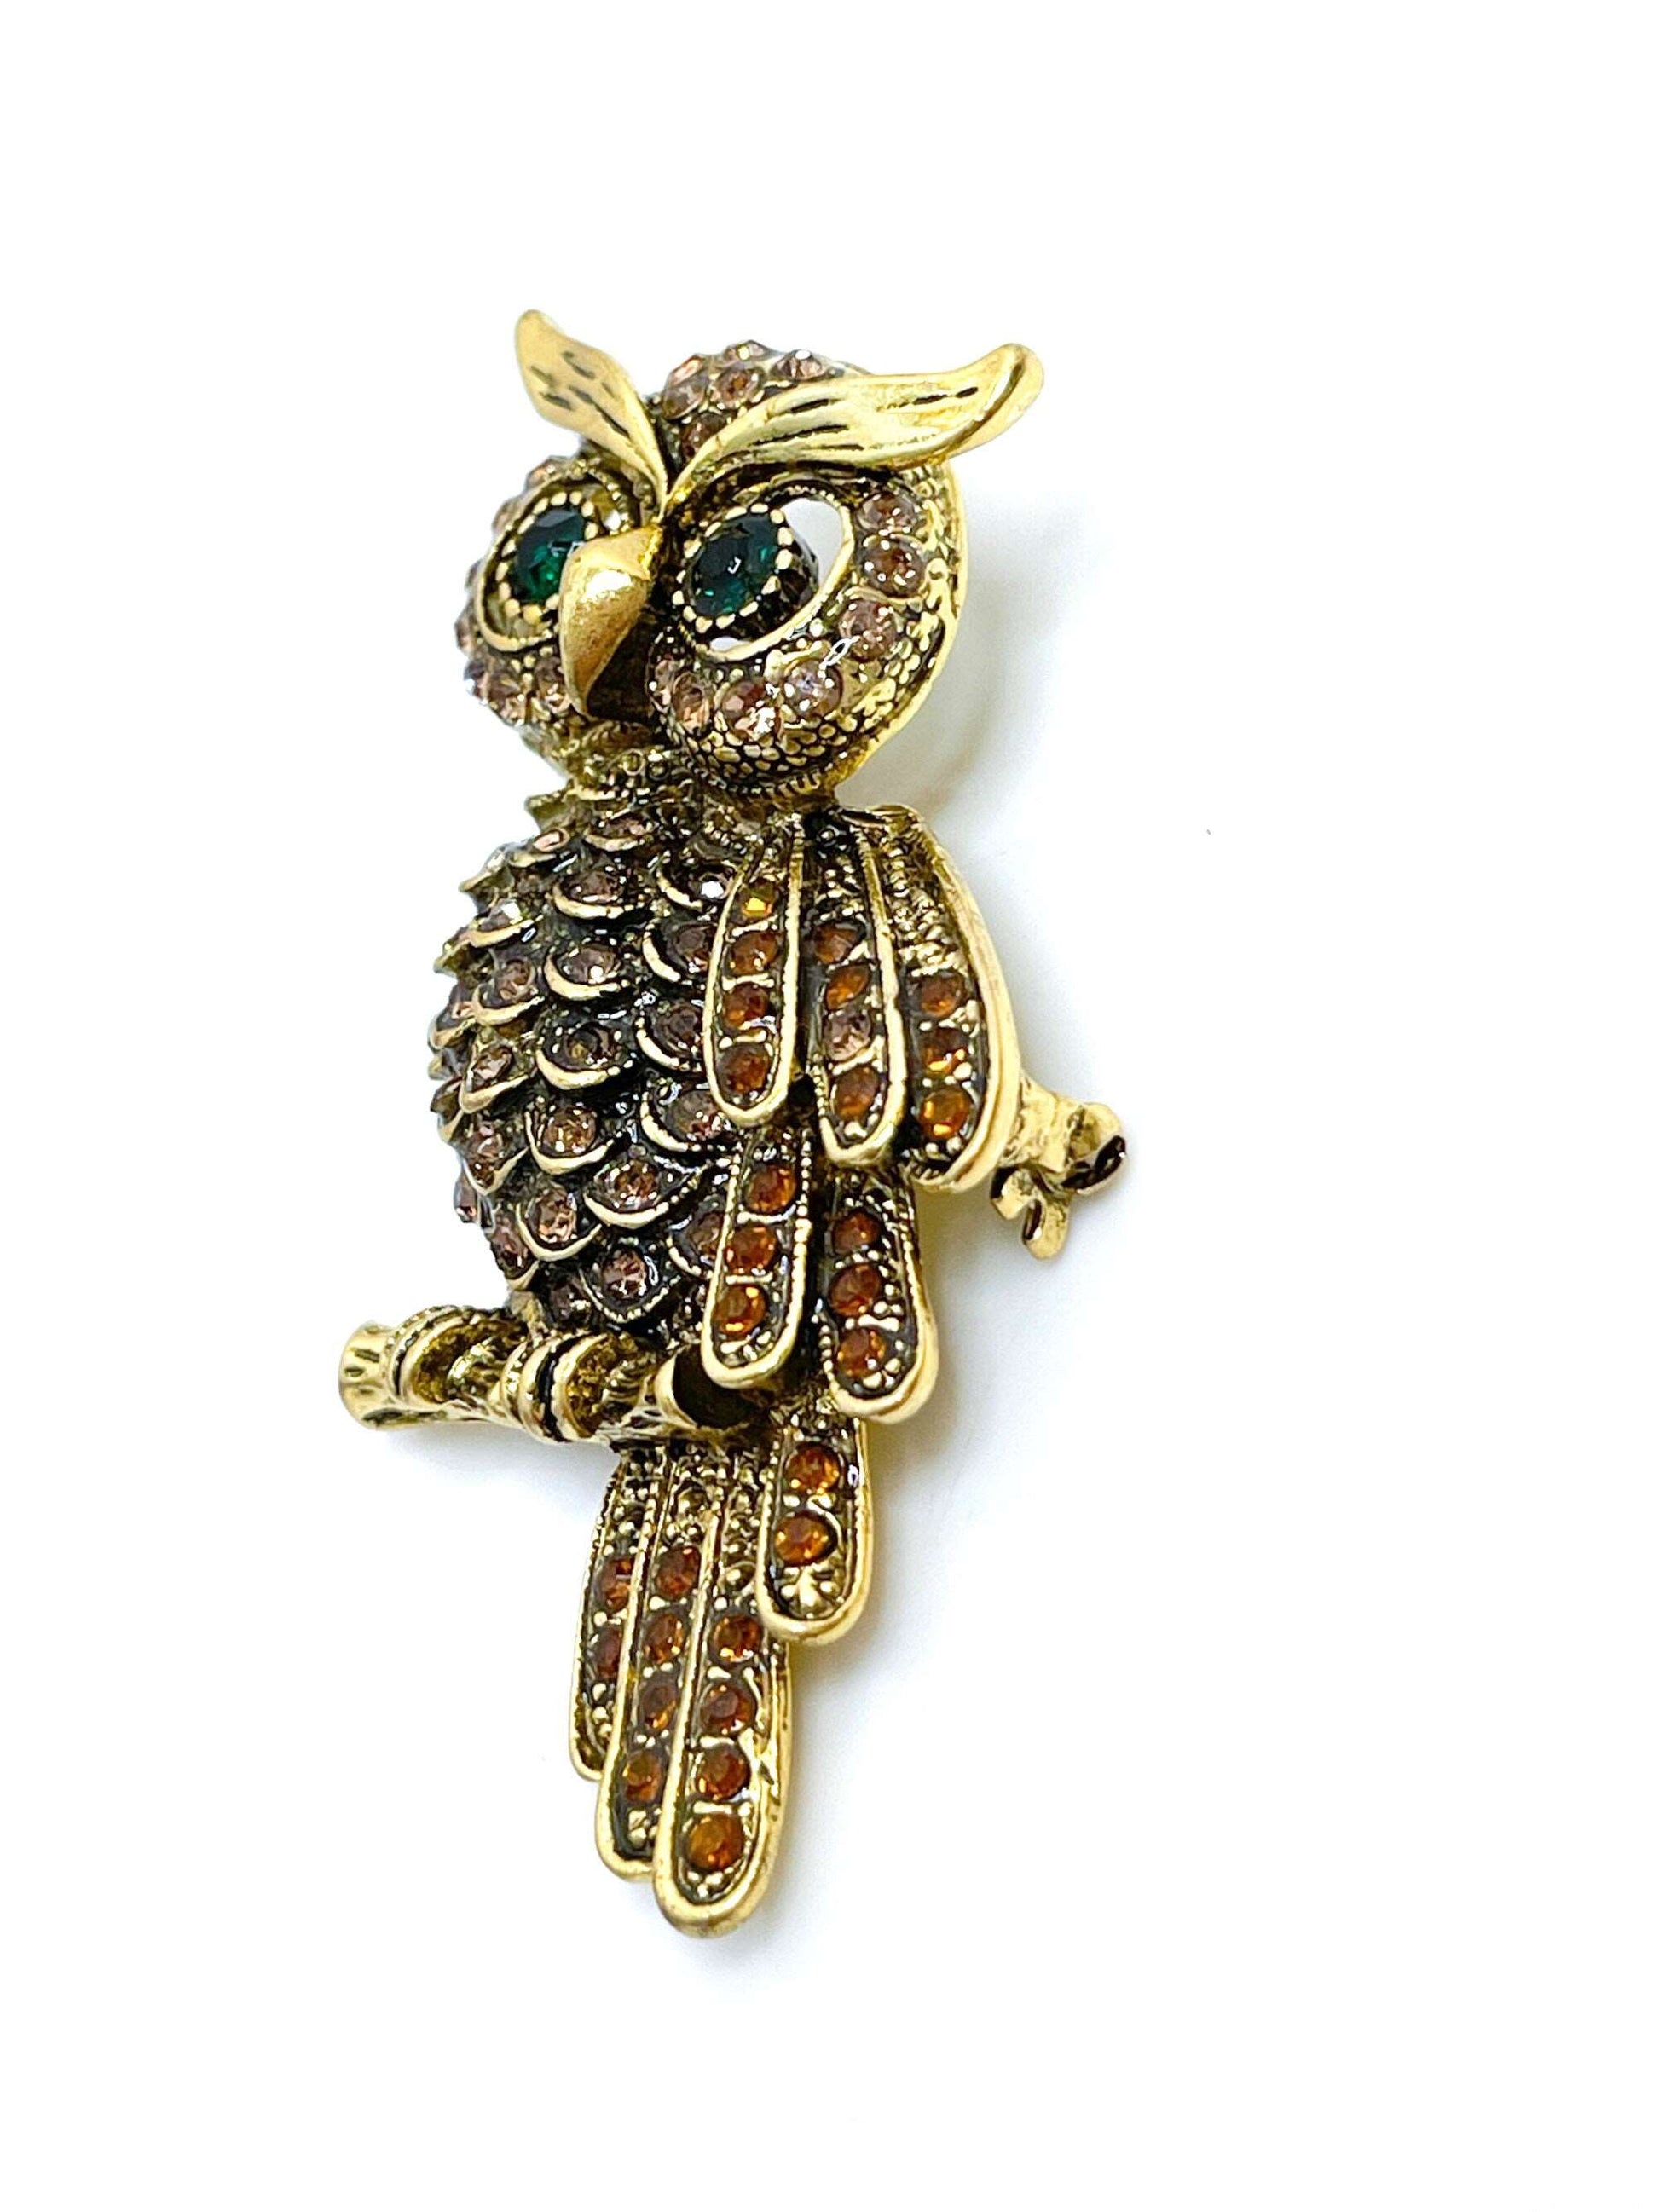 Antique Gold Vintage Owl Brooch | Rhinestone Crystal Pin | Owl Lovers Gift